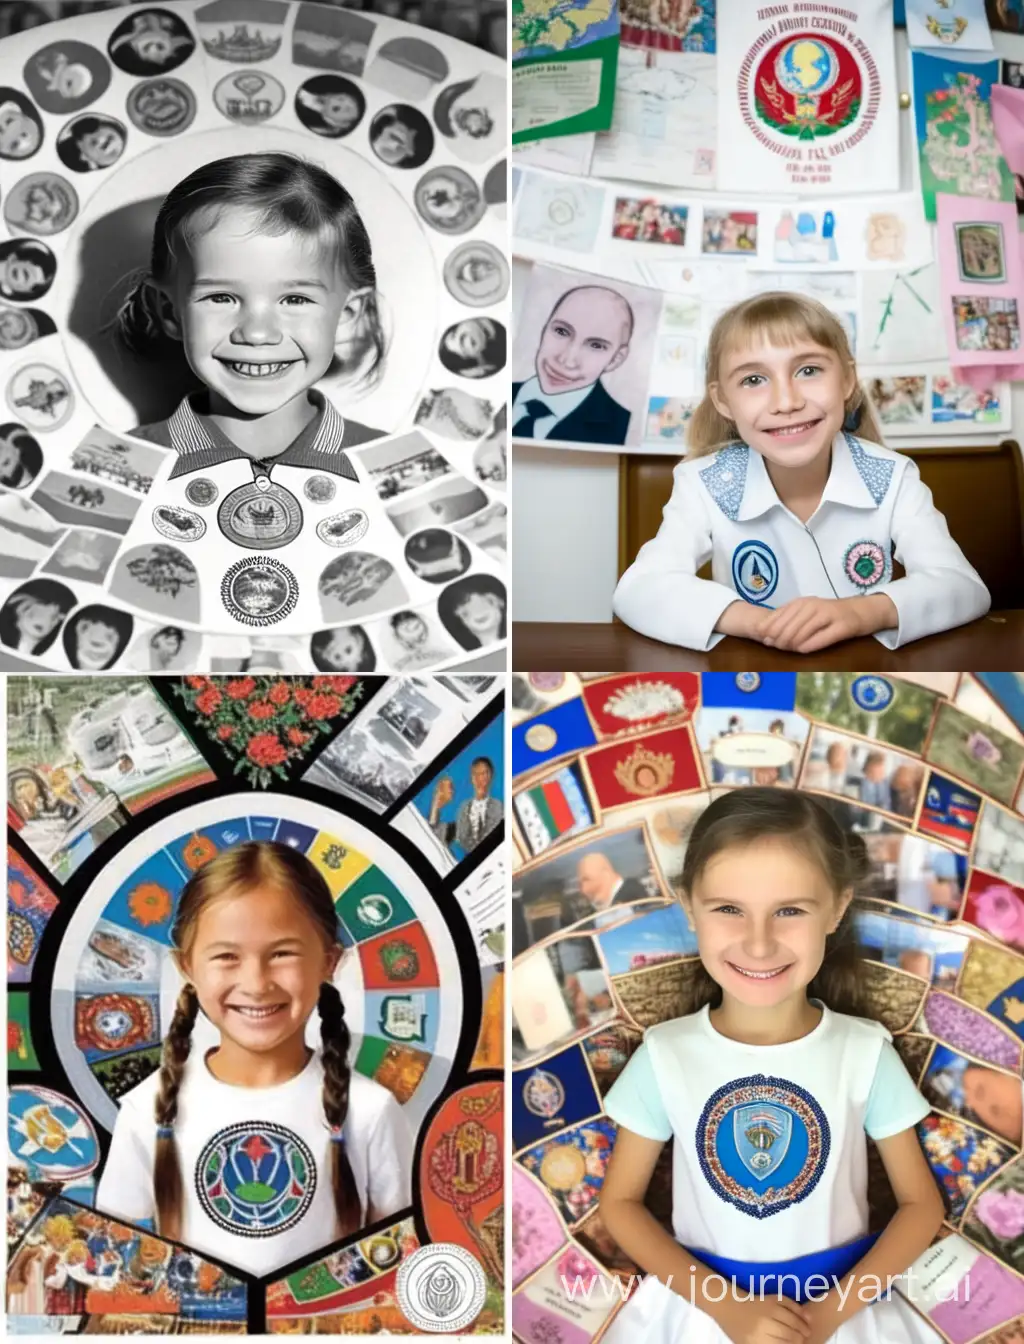 Childrens-Rights-Advocacy-First-Grade-Girl-Embracing-UN-Convention-Symbols